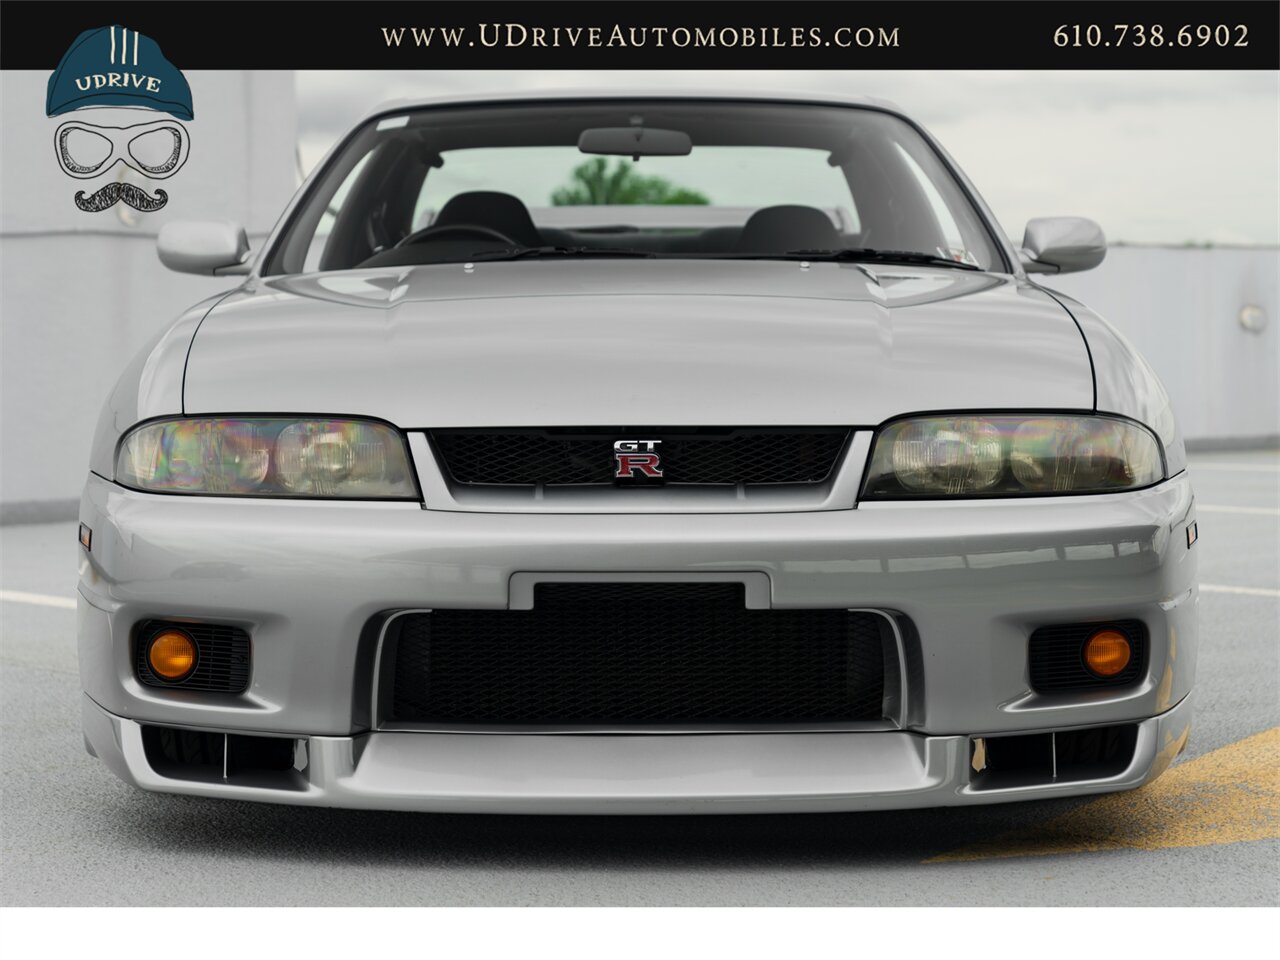 1997 Nissan Skyline GT-R R33 28k Miles Collector Grade  Motorex Legally Imported Titled Federalized Service History - Photo 12 - West Chester, PA 19382